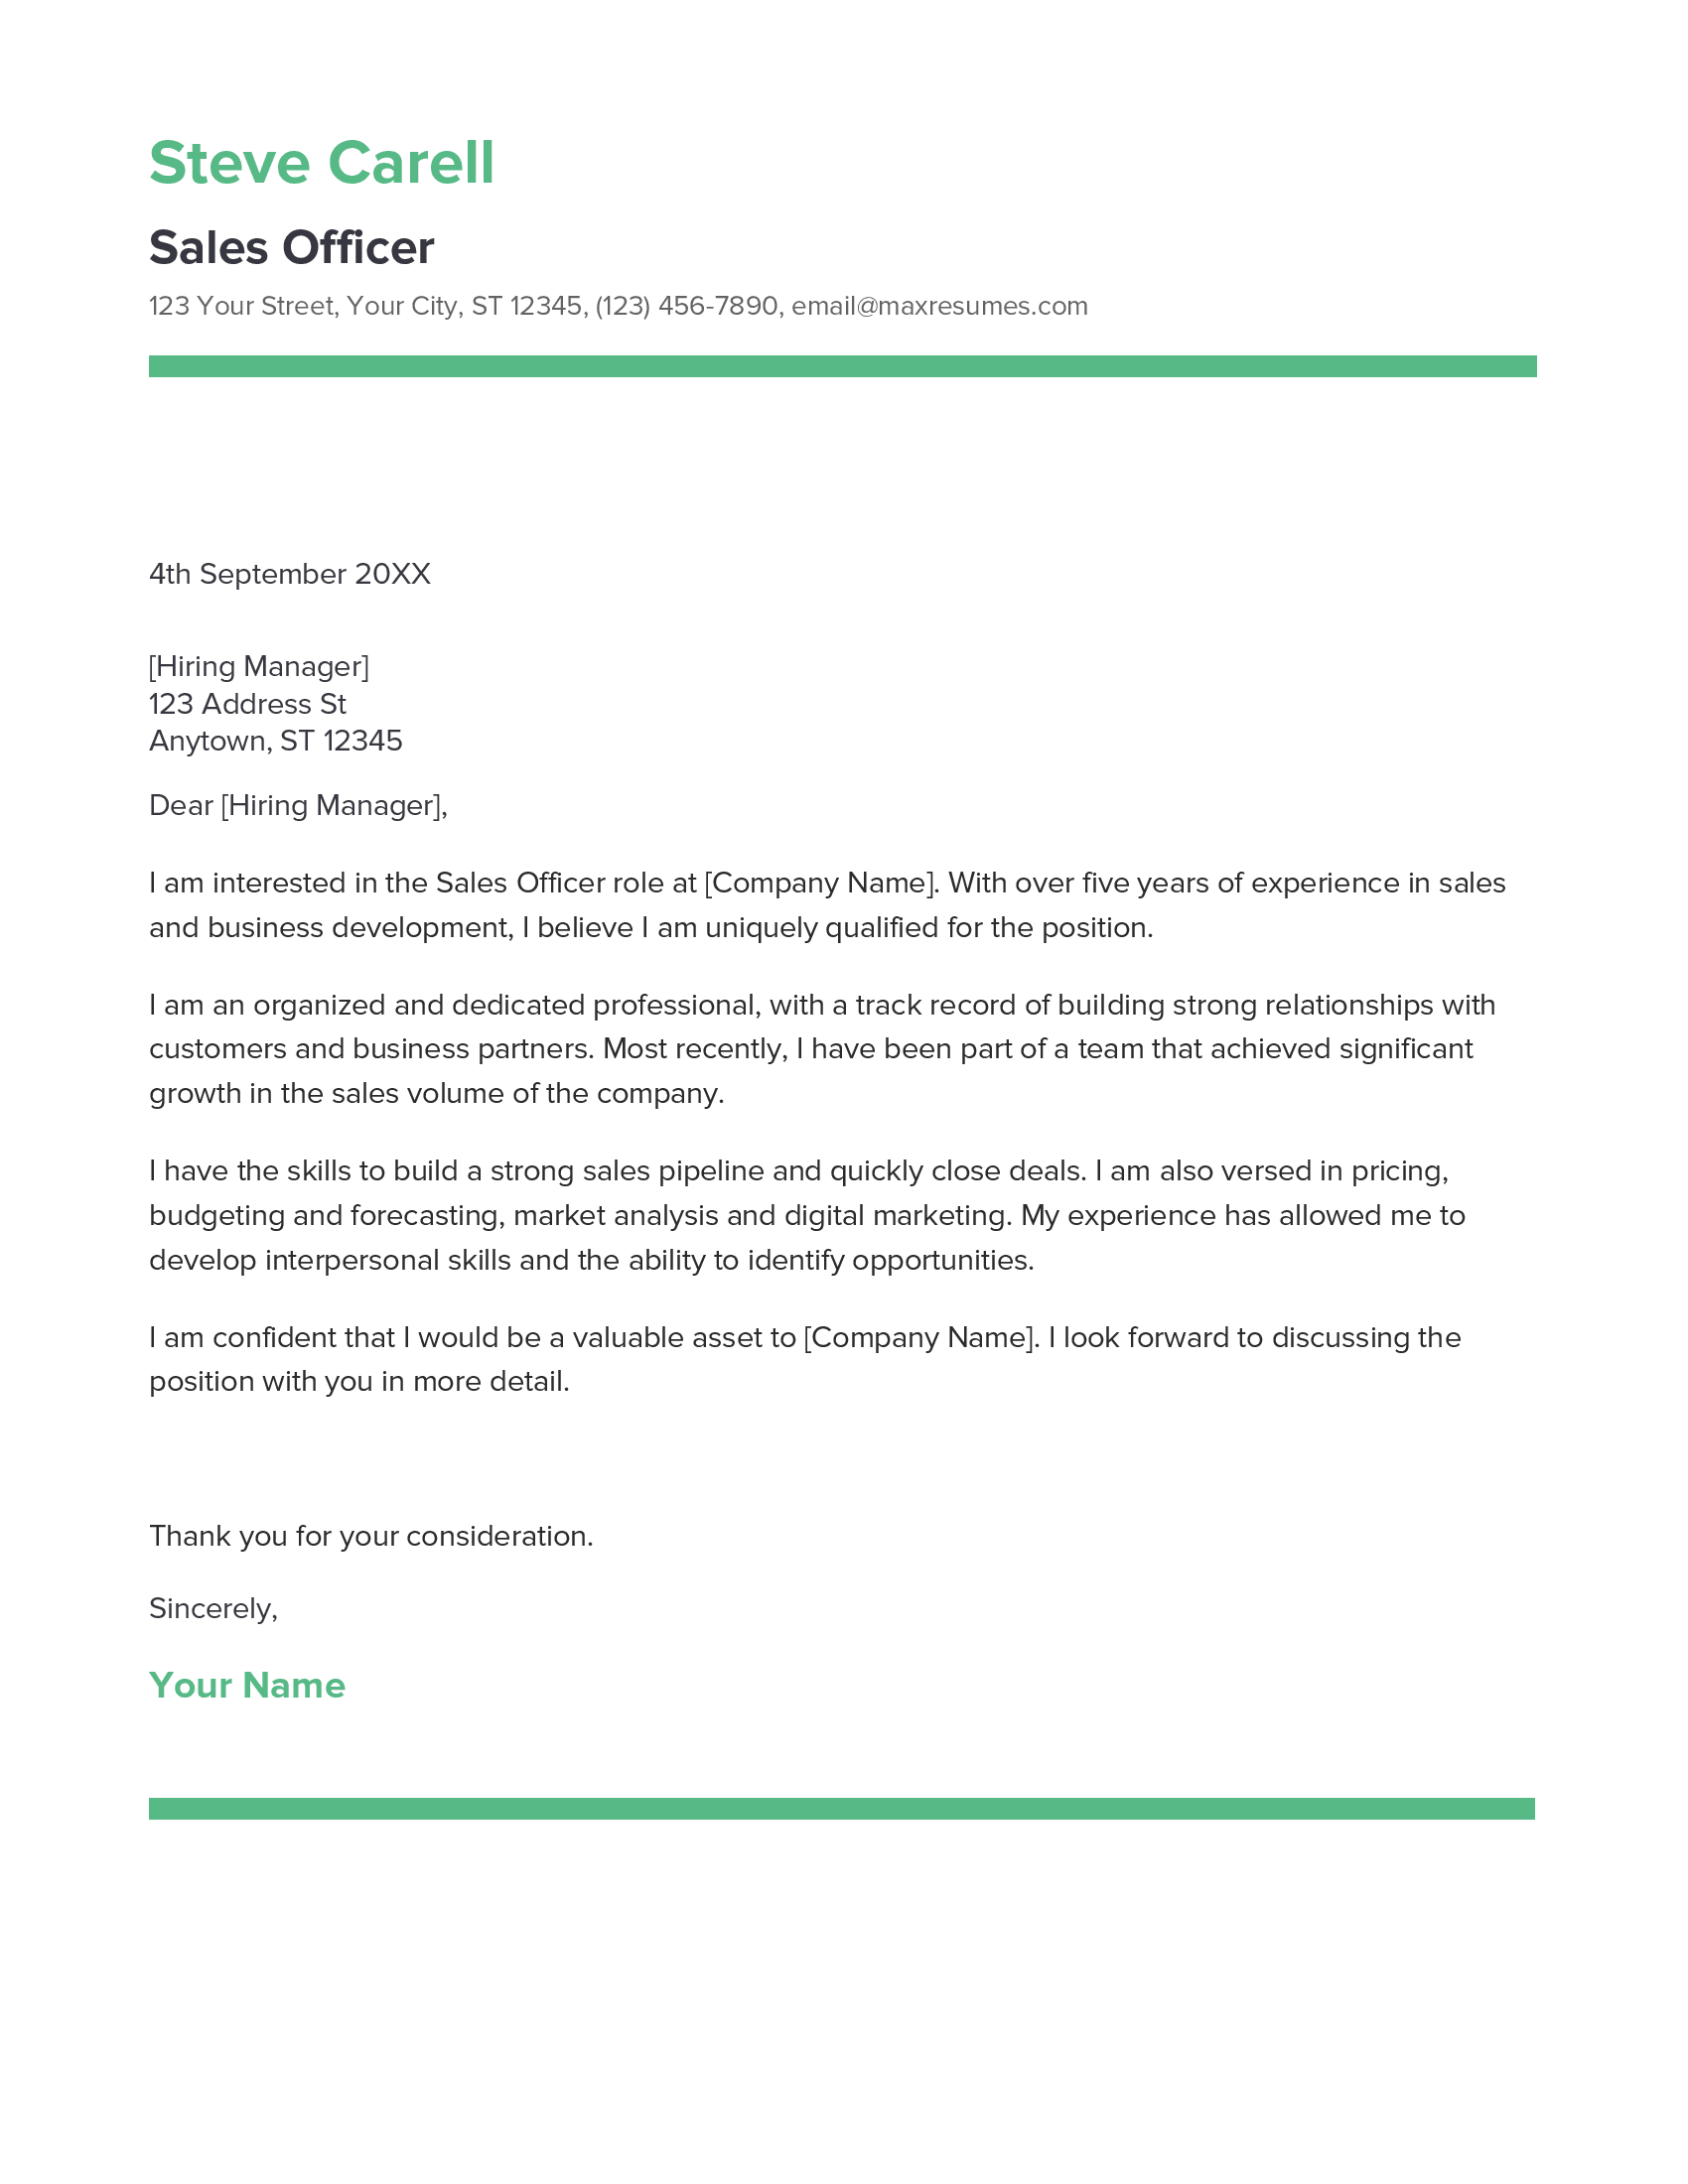 Sales Officer Cover Letter Example